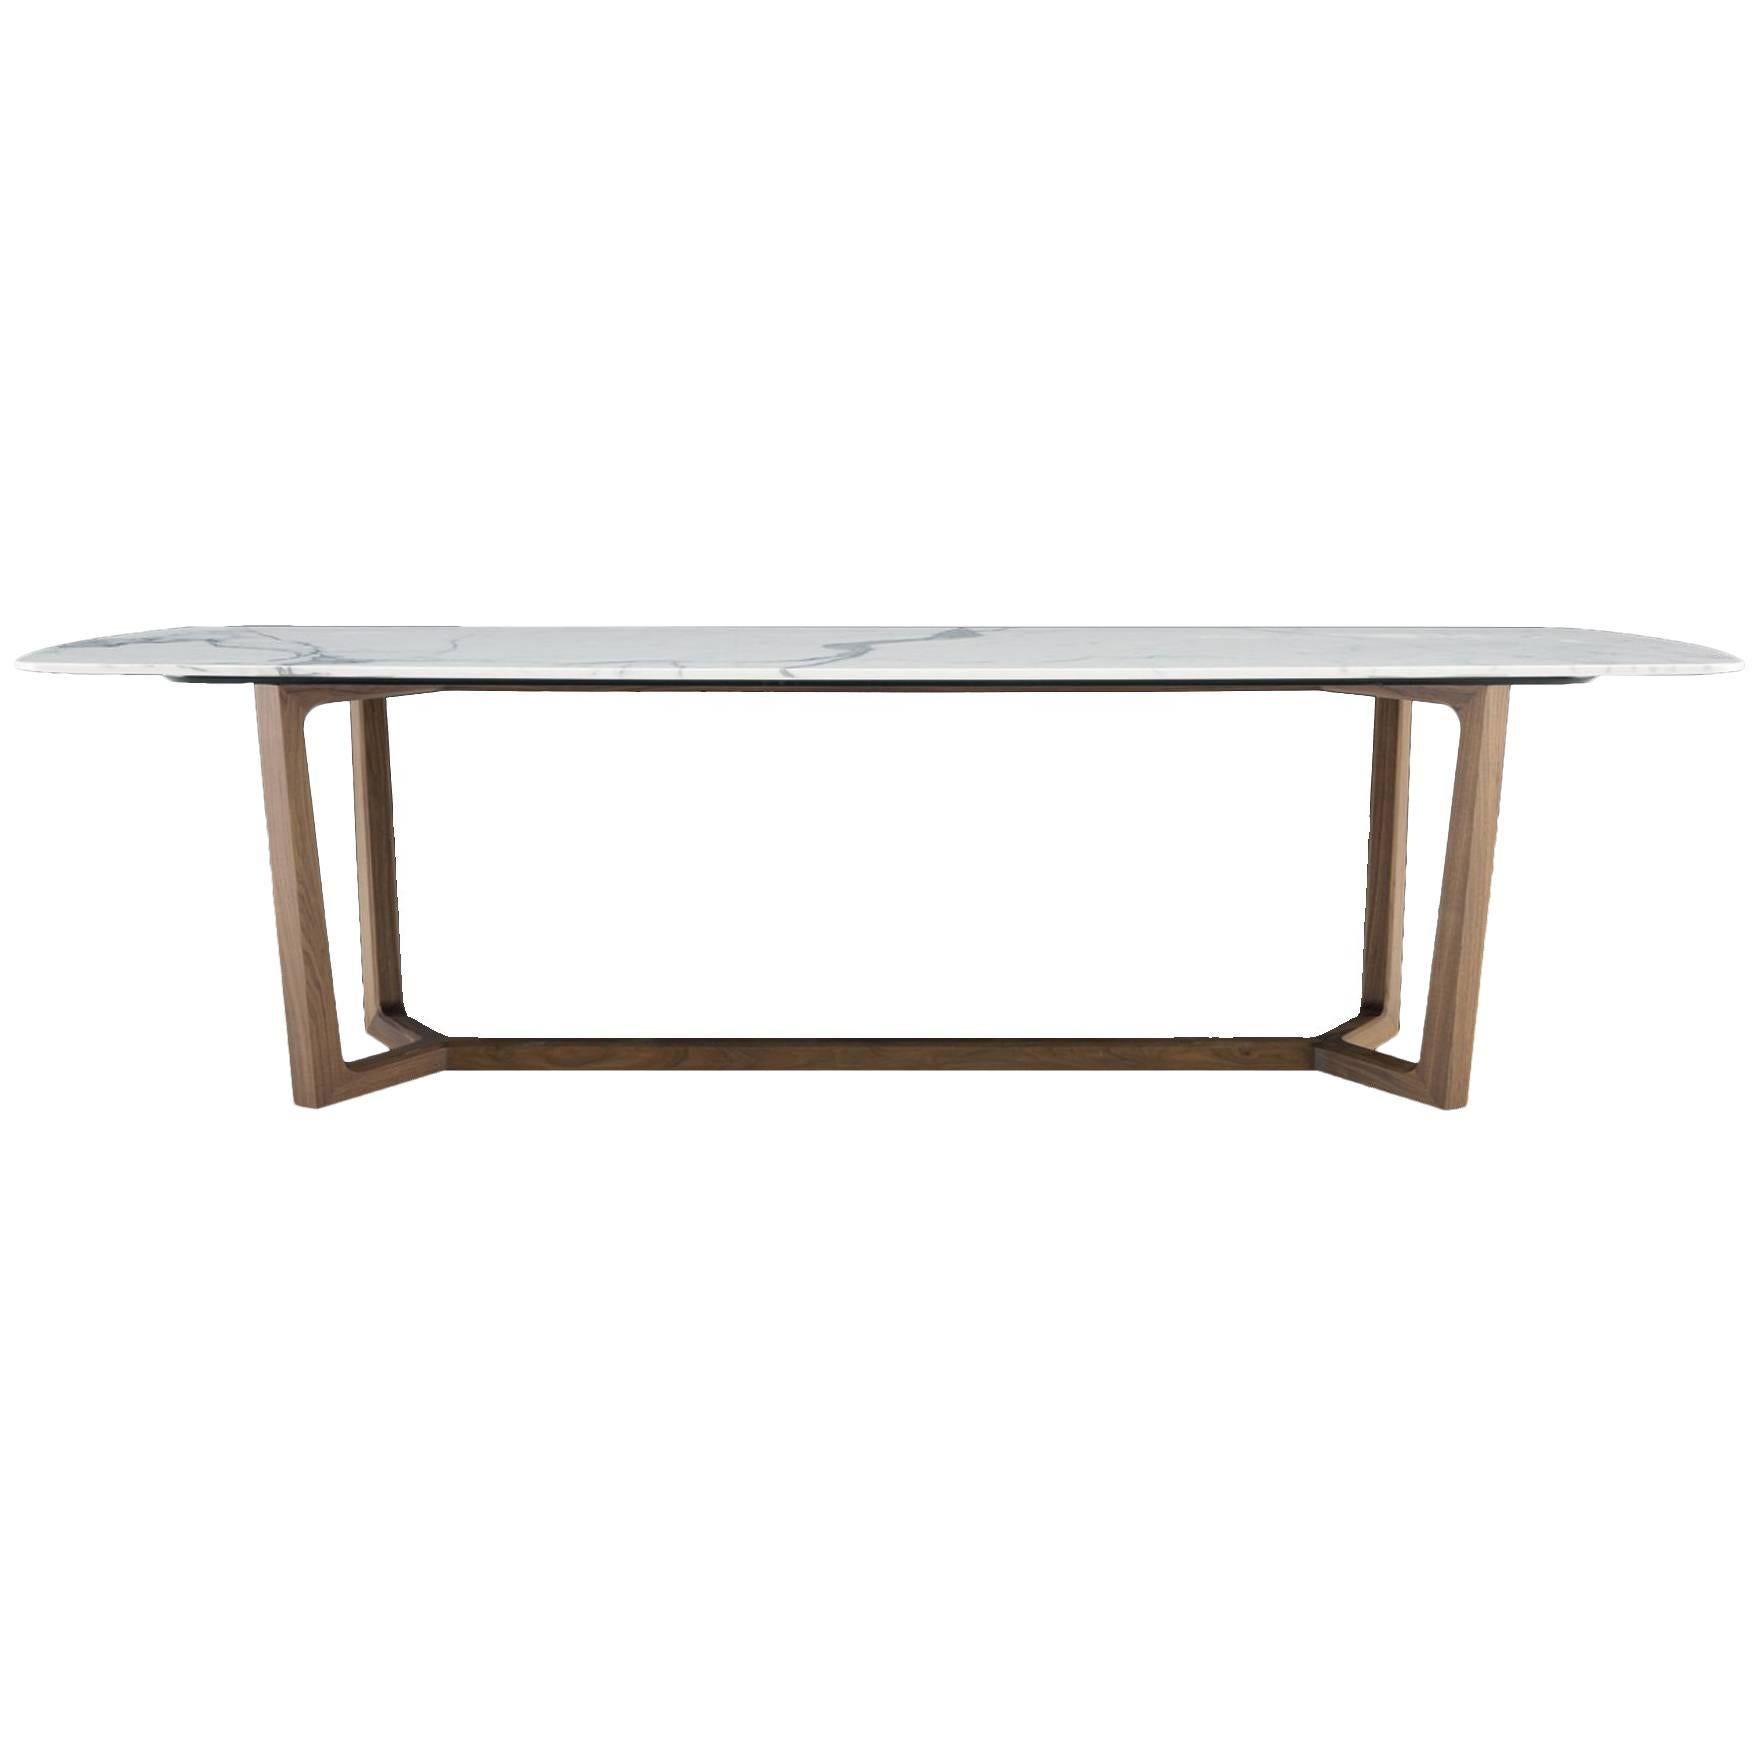 Poliform Concorde Dining Table, Four Wood Bases and Six Marble Top Options For Sale